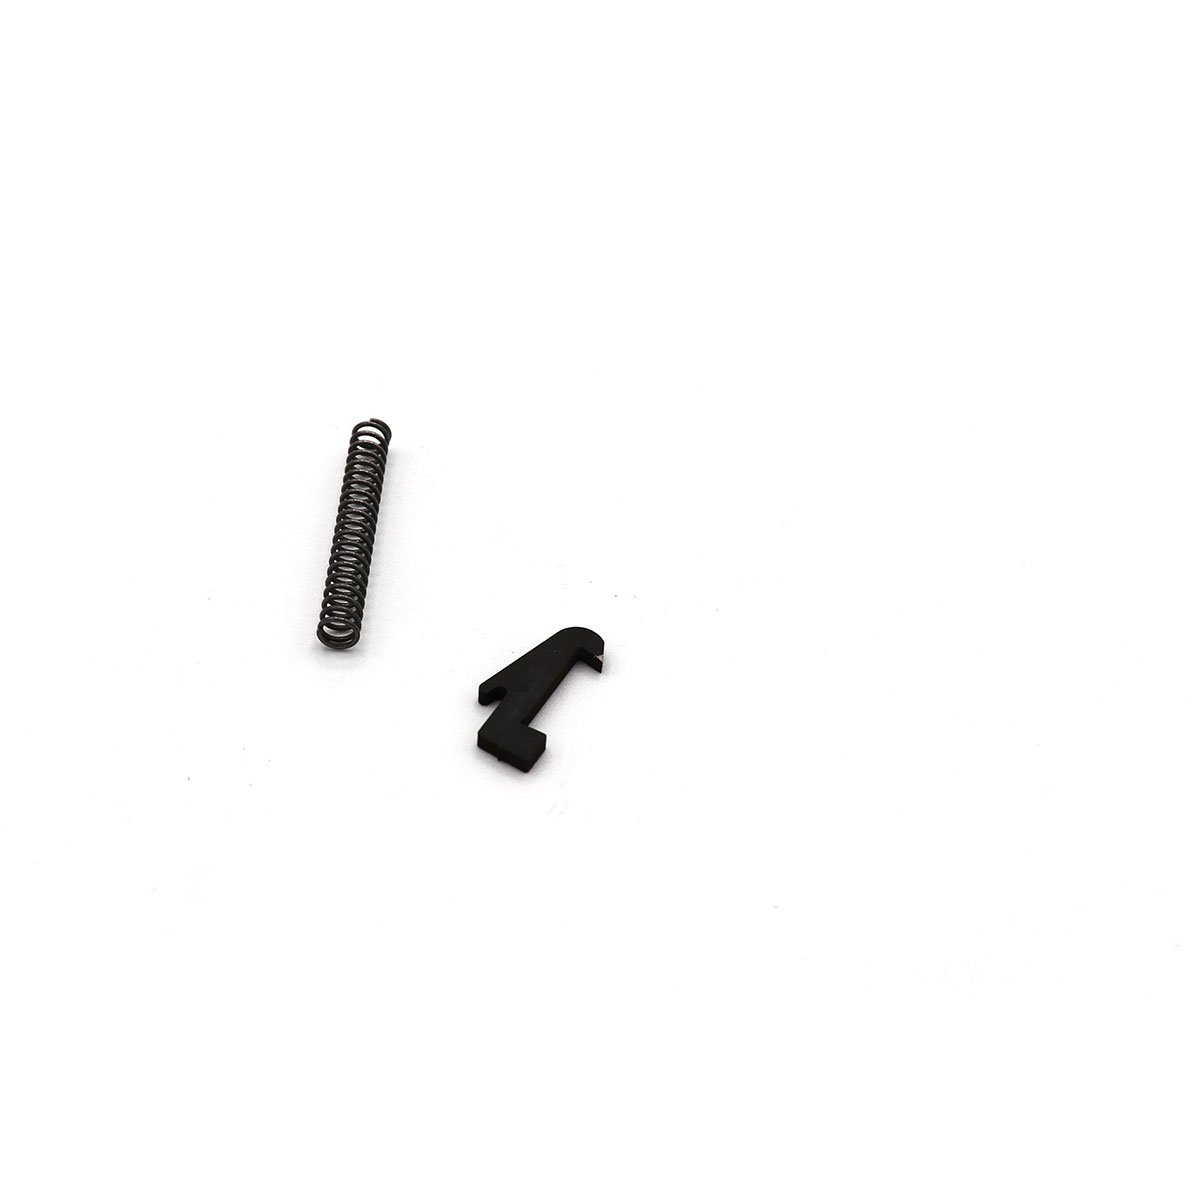 KIDD INNOVATIVE DESIGN - EXTRACTOR AND SPRING REPLACEMENT FOR RUGER 10/22